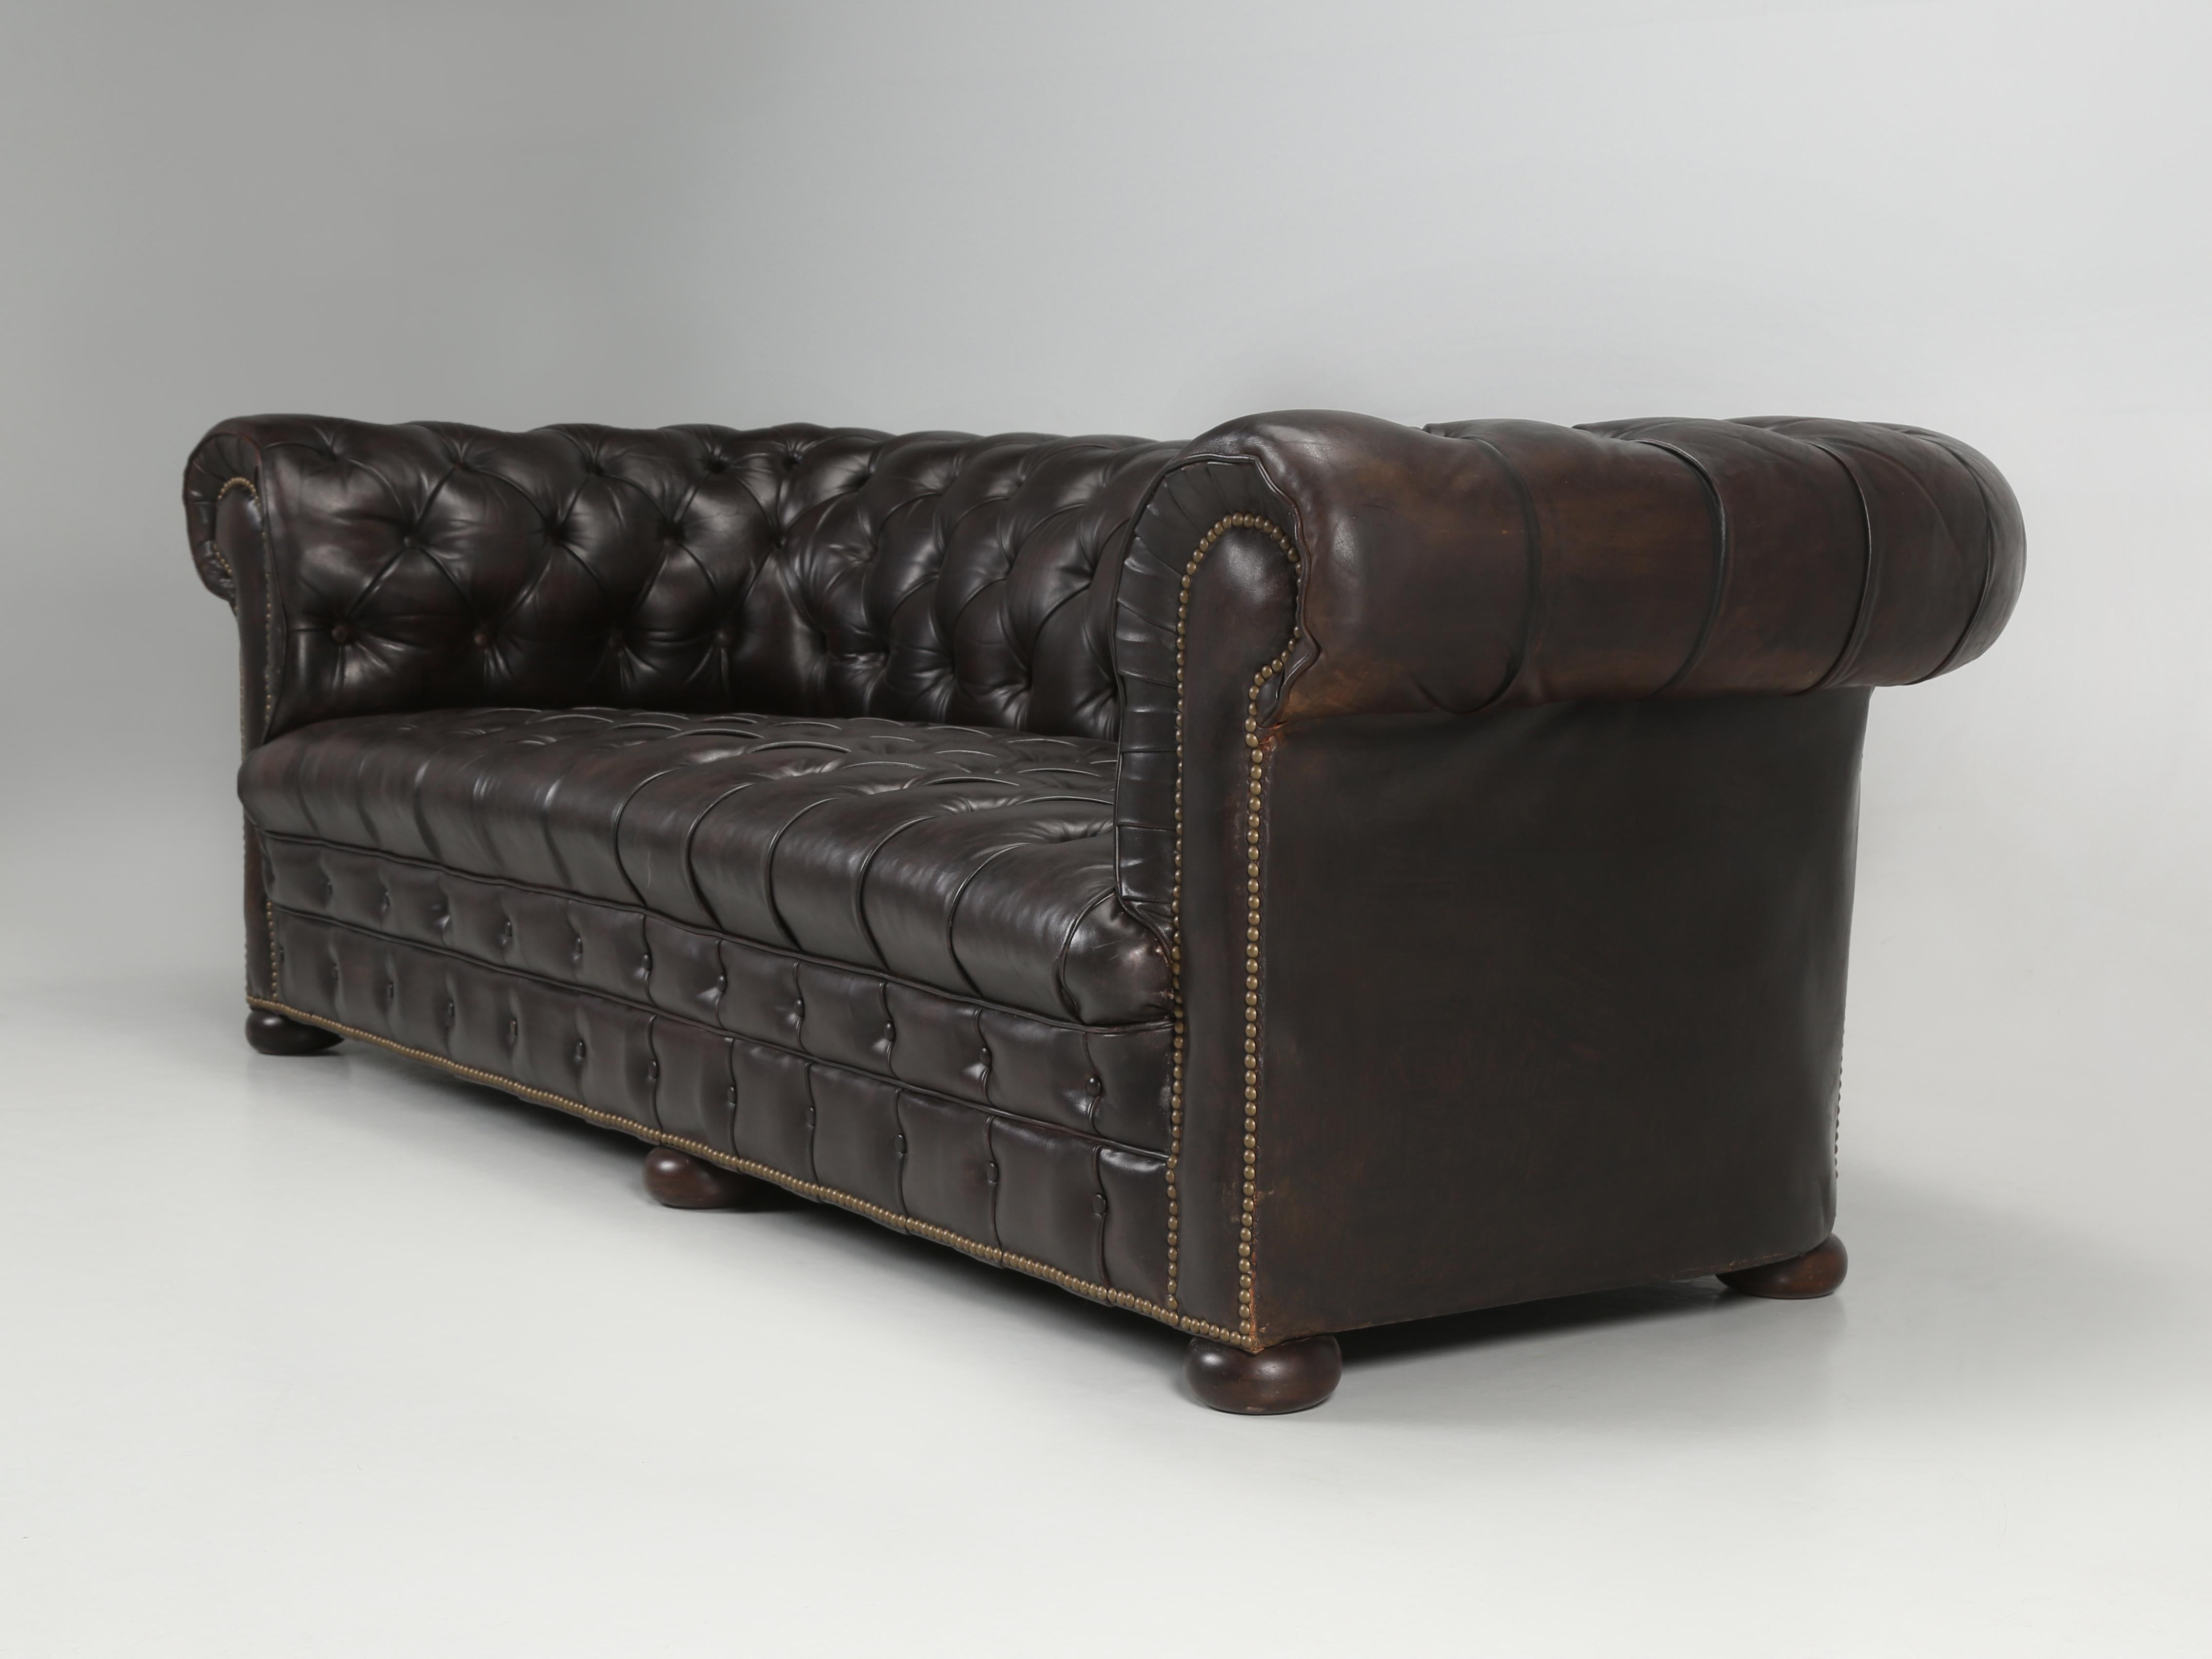 Antique English Tufted Original Leather Chesterfield Sofa Thoroughly Restored For Sale 10